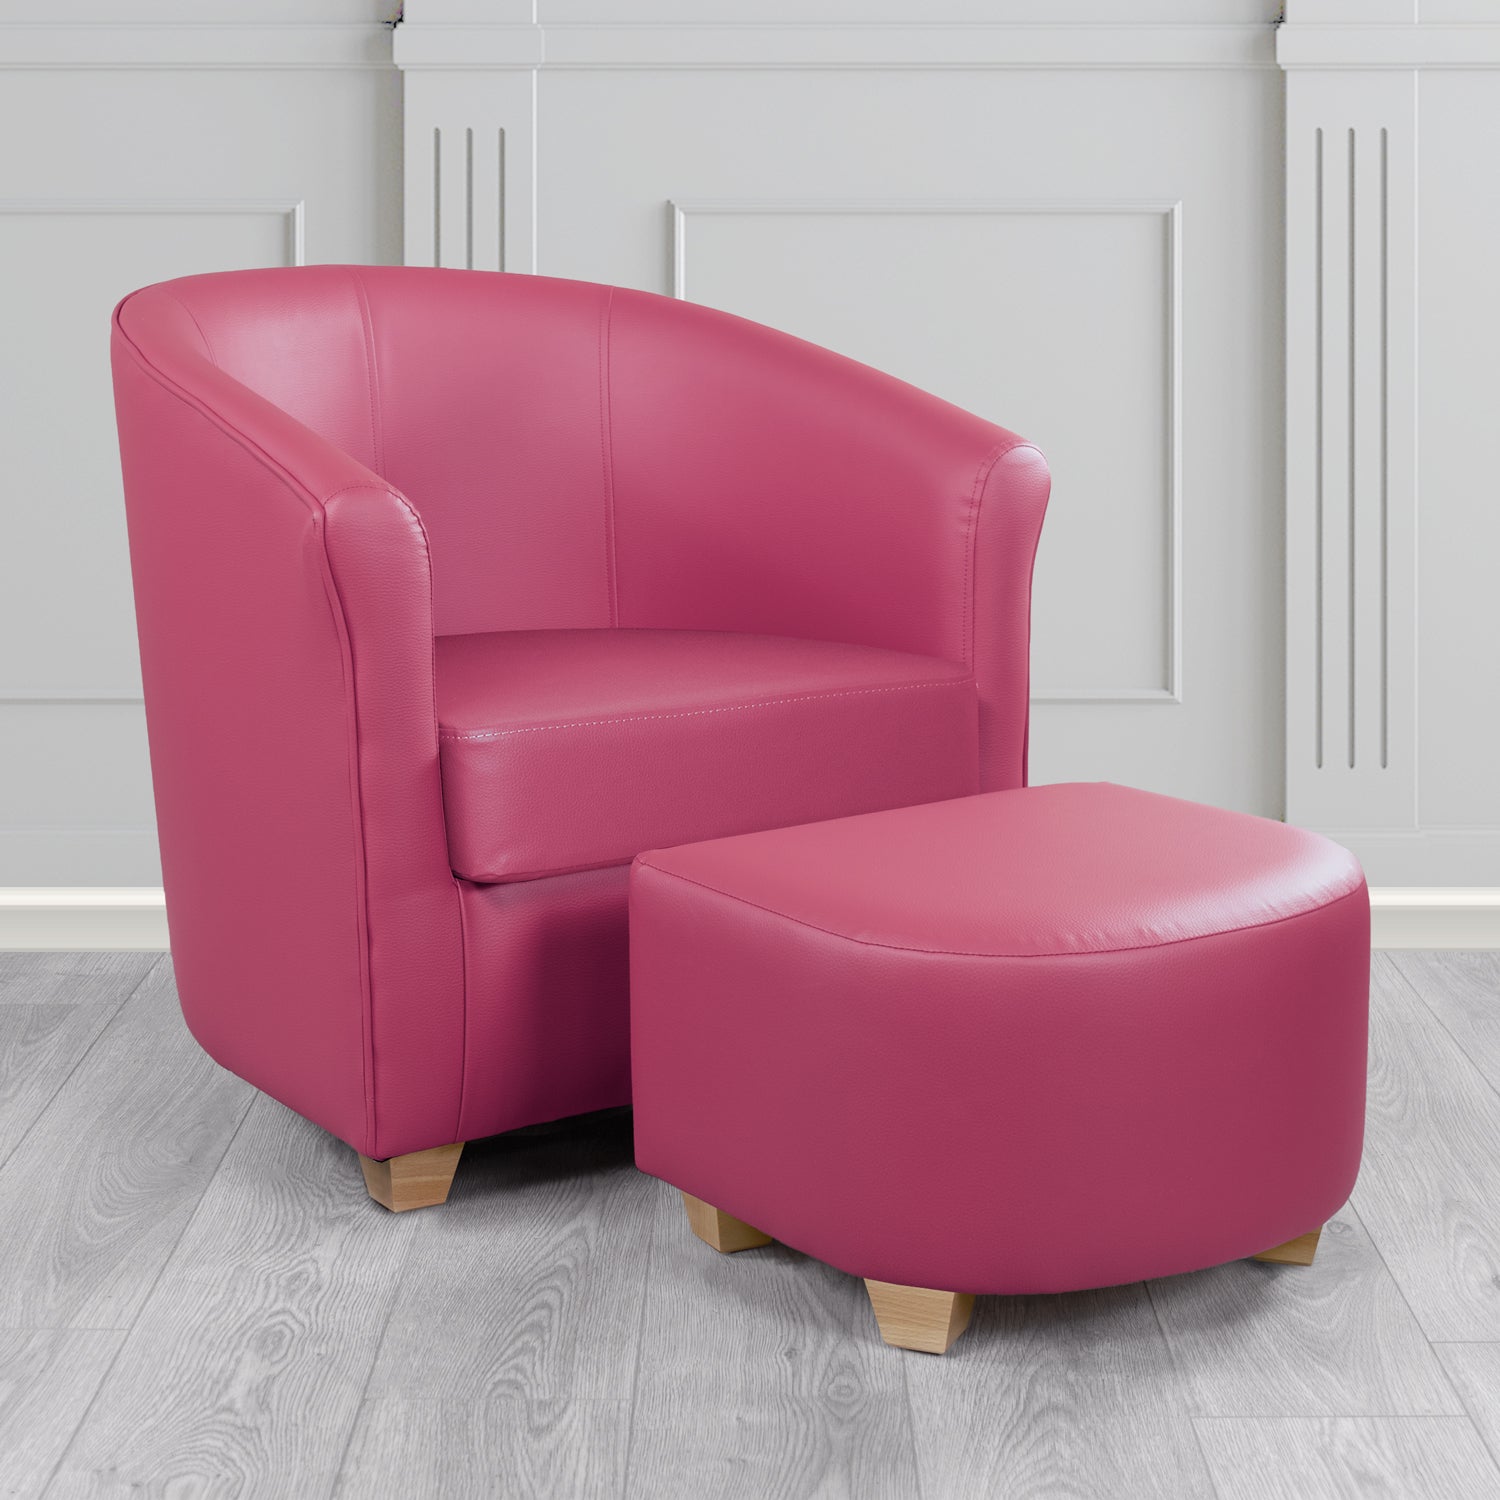 Cannes Tub Chair with Footstool Set in Just Colour Deep Rose Crib 5 Faux Leather - The Tub Chair Shop